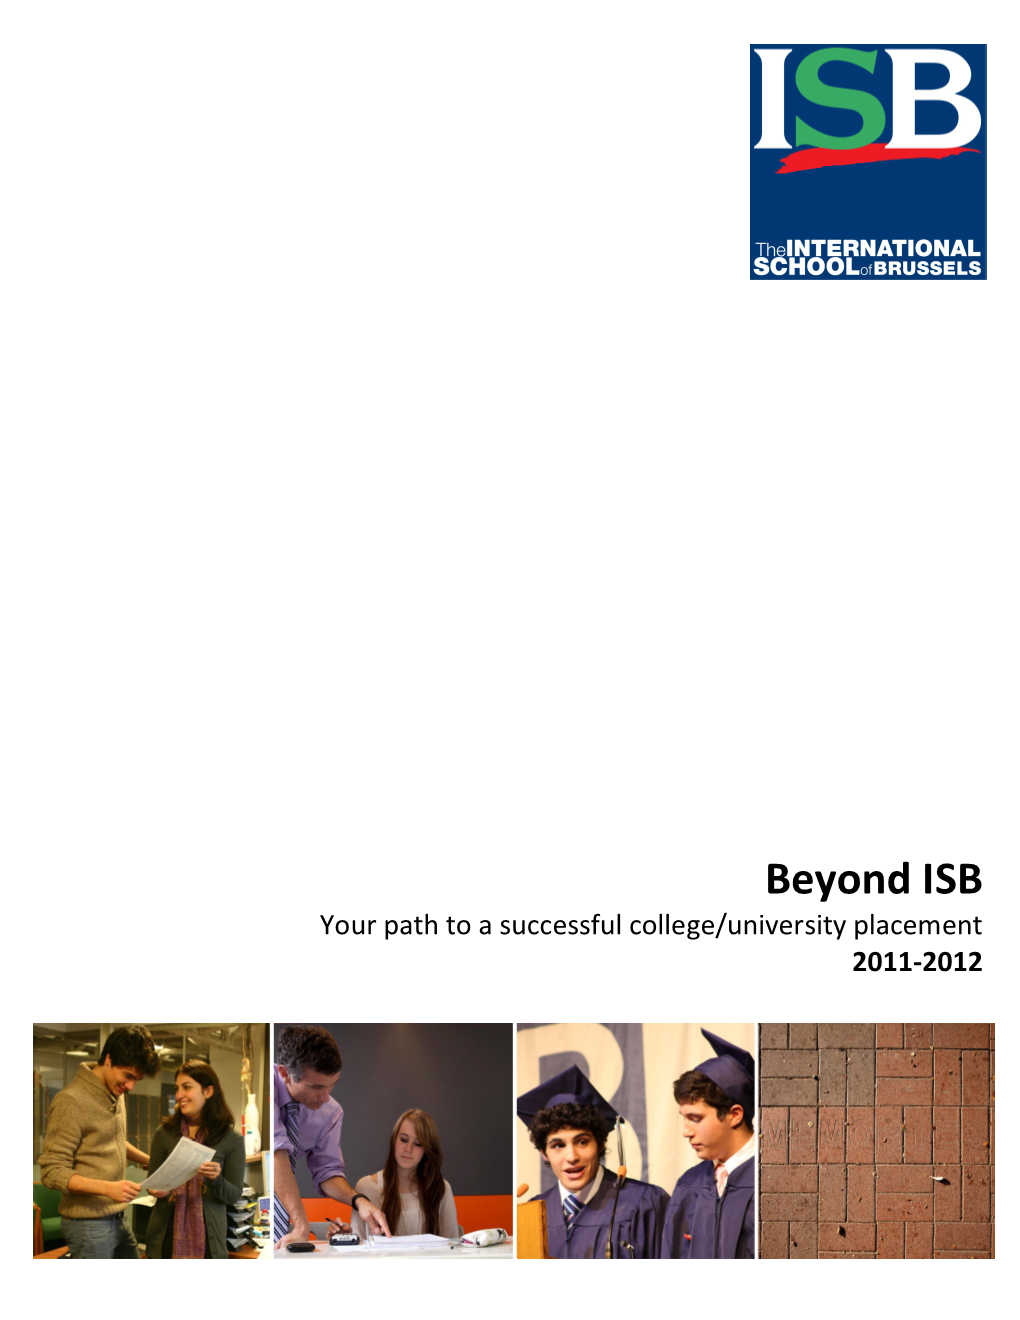 Beyond ISB: Your Path to a Successful College/University Placement